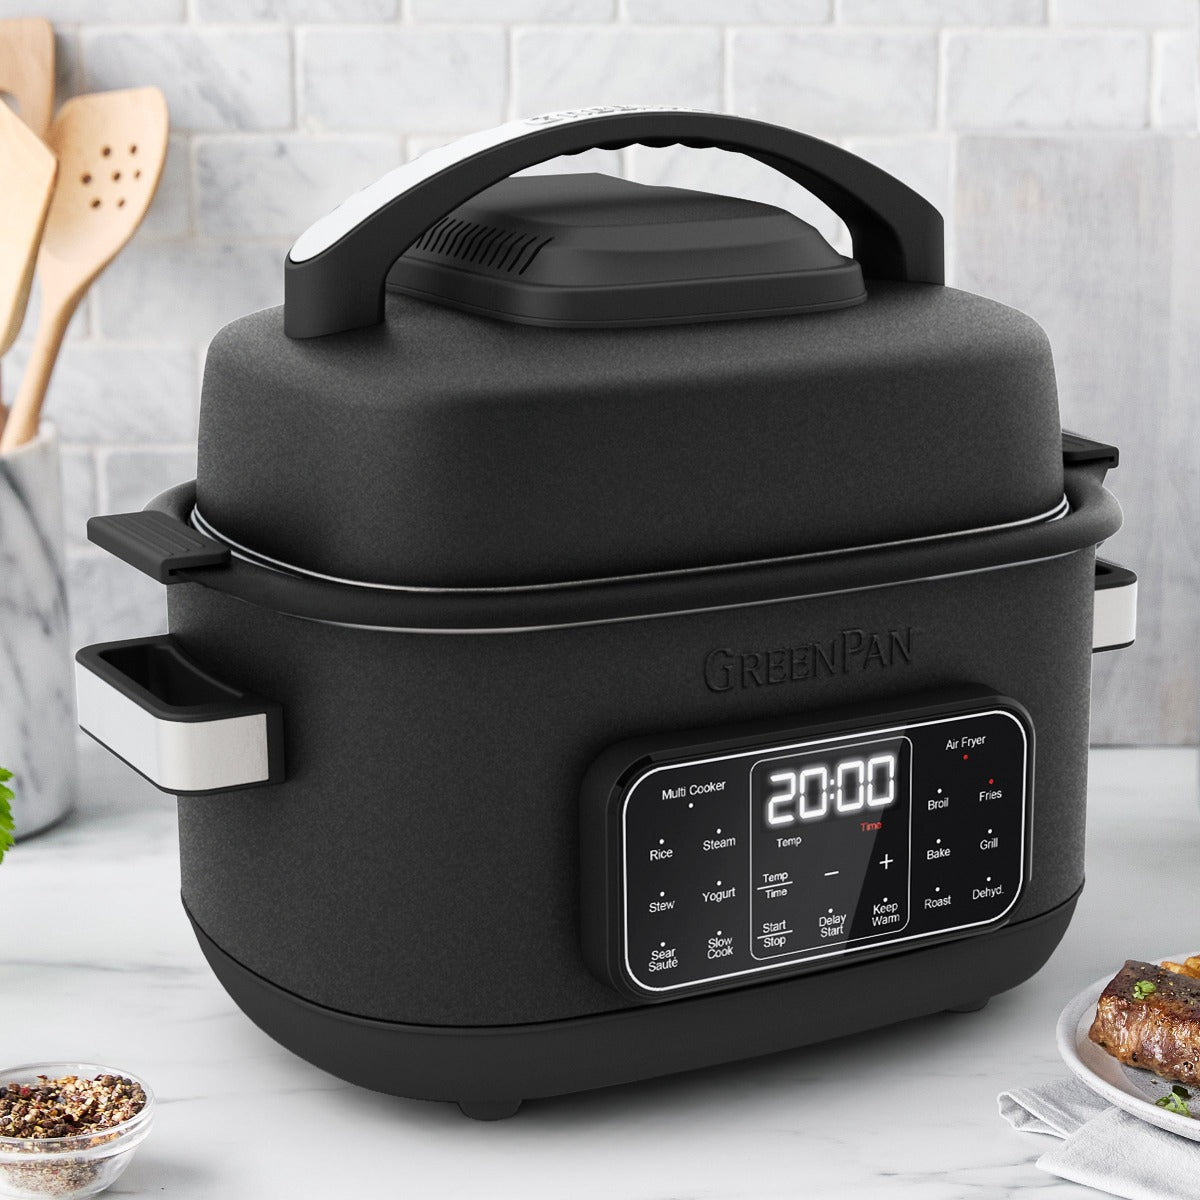  Ninja 3-in-1 Cooking System: Slow Cookers: Home & Kitchen